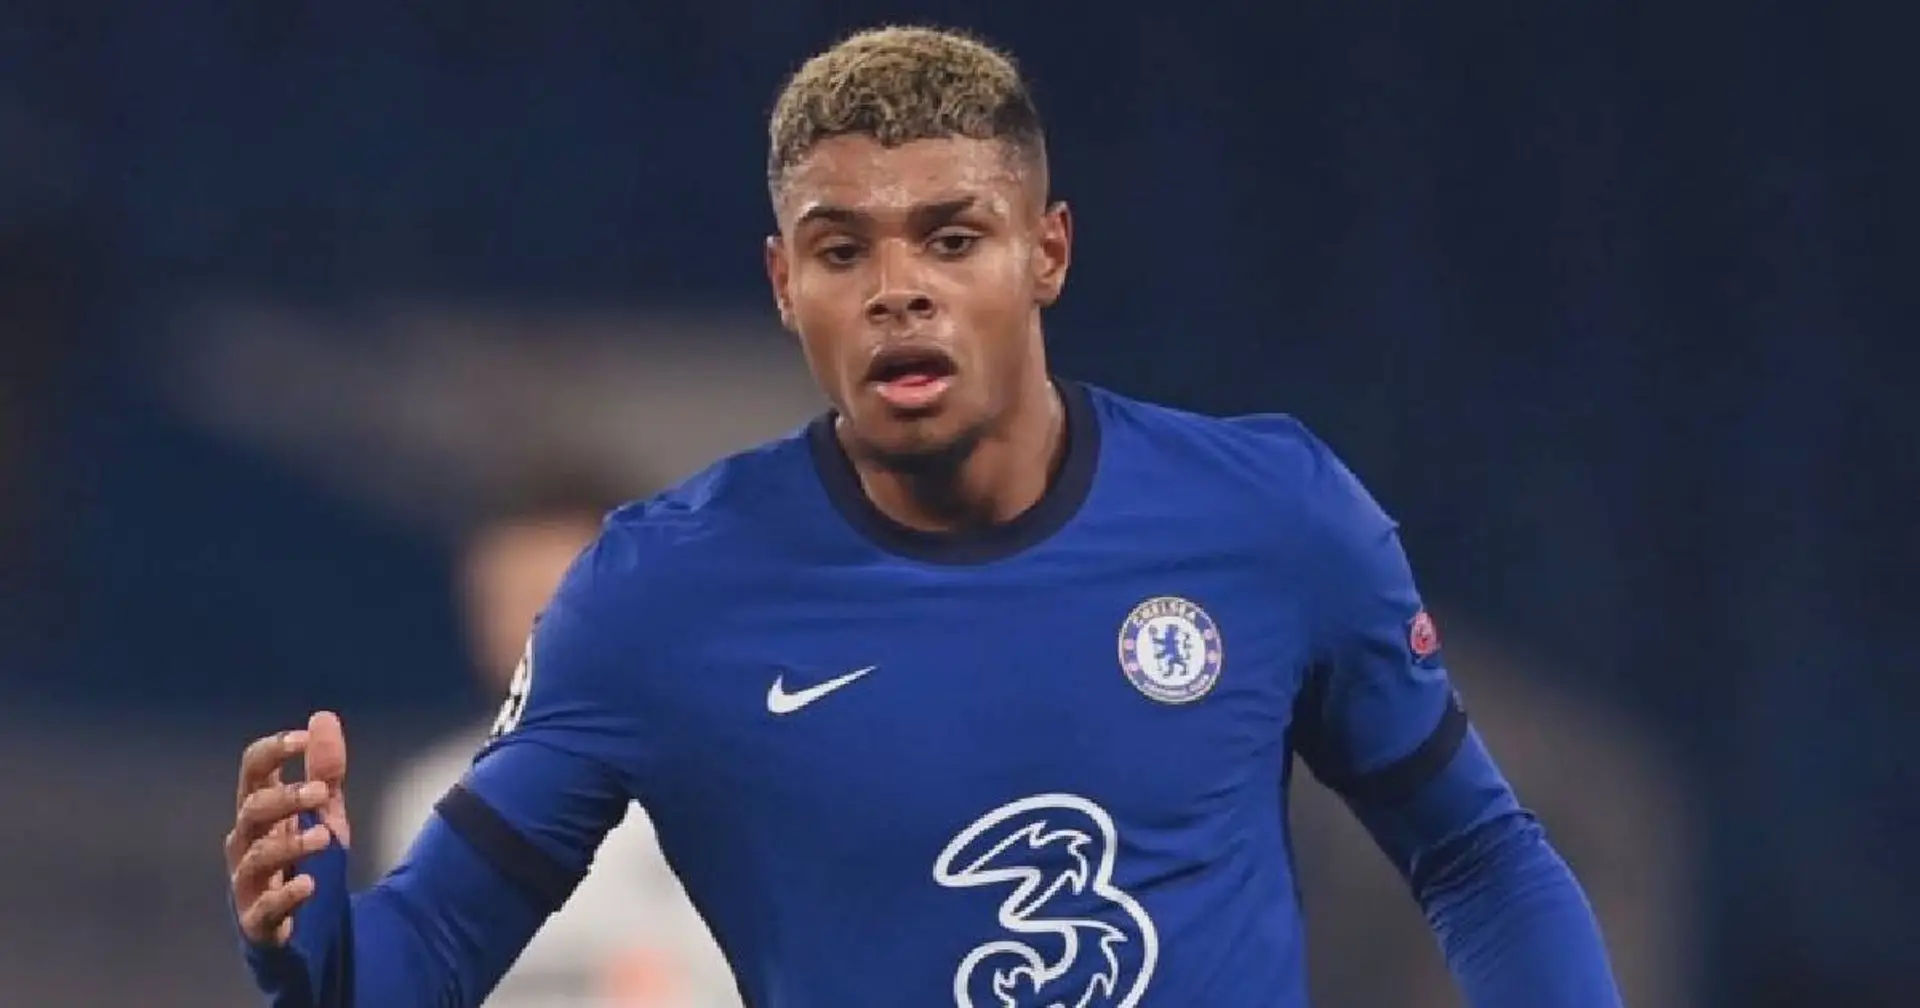 'He's getting better - he showed his ability to step up': Lampard details Anjorin's progress with Blues, highlights teenager's strengths 